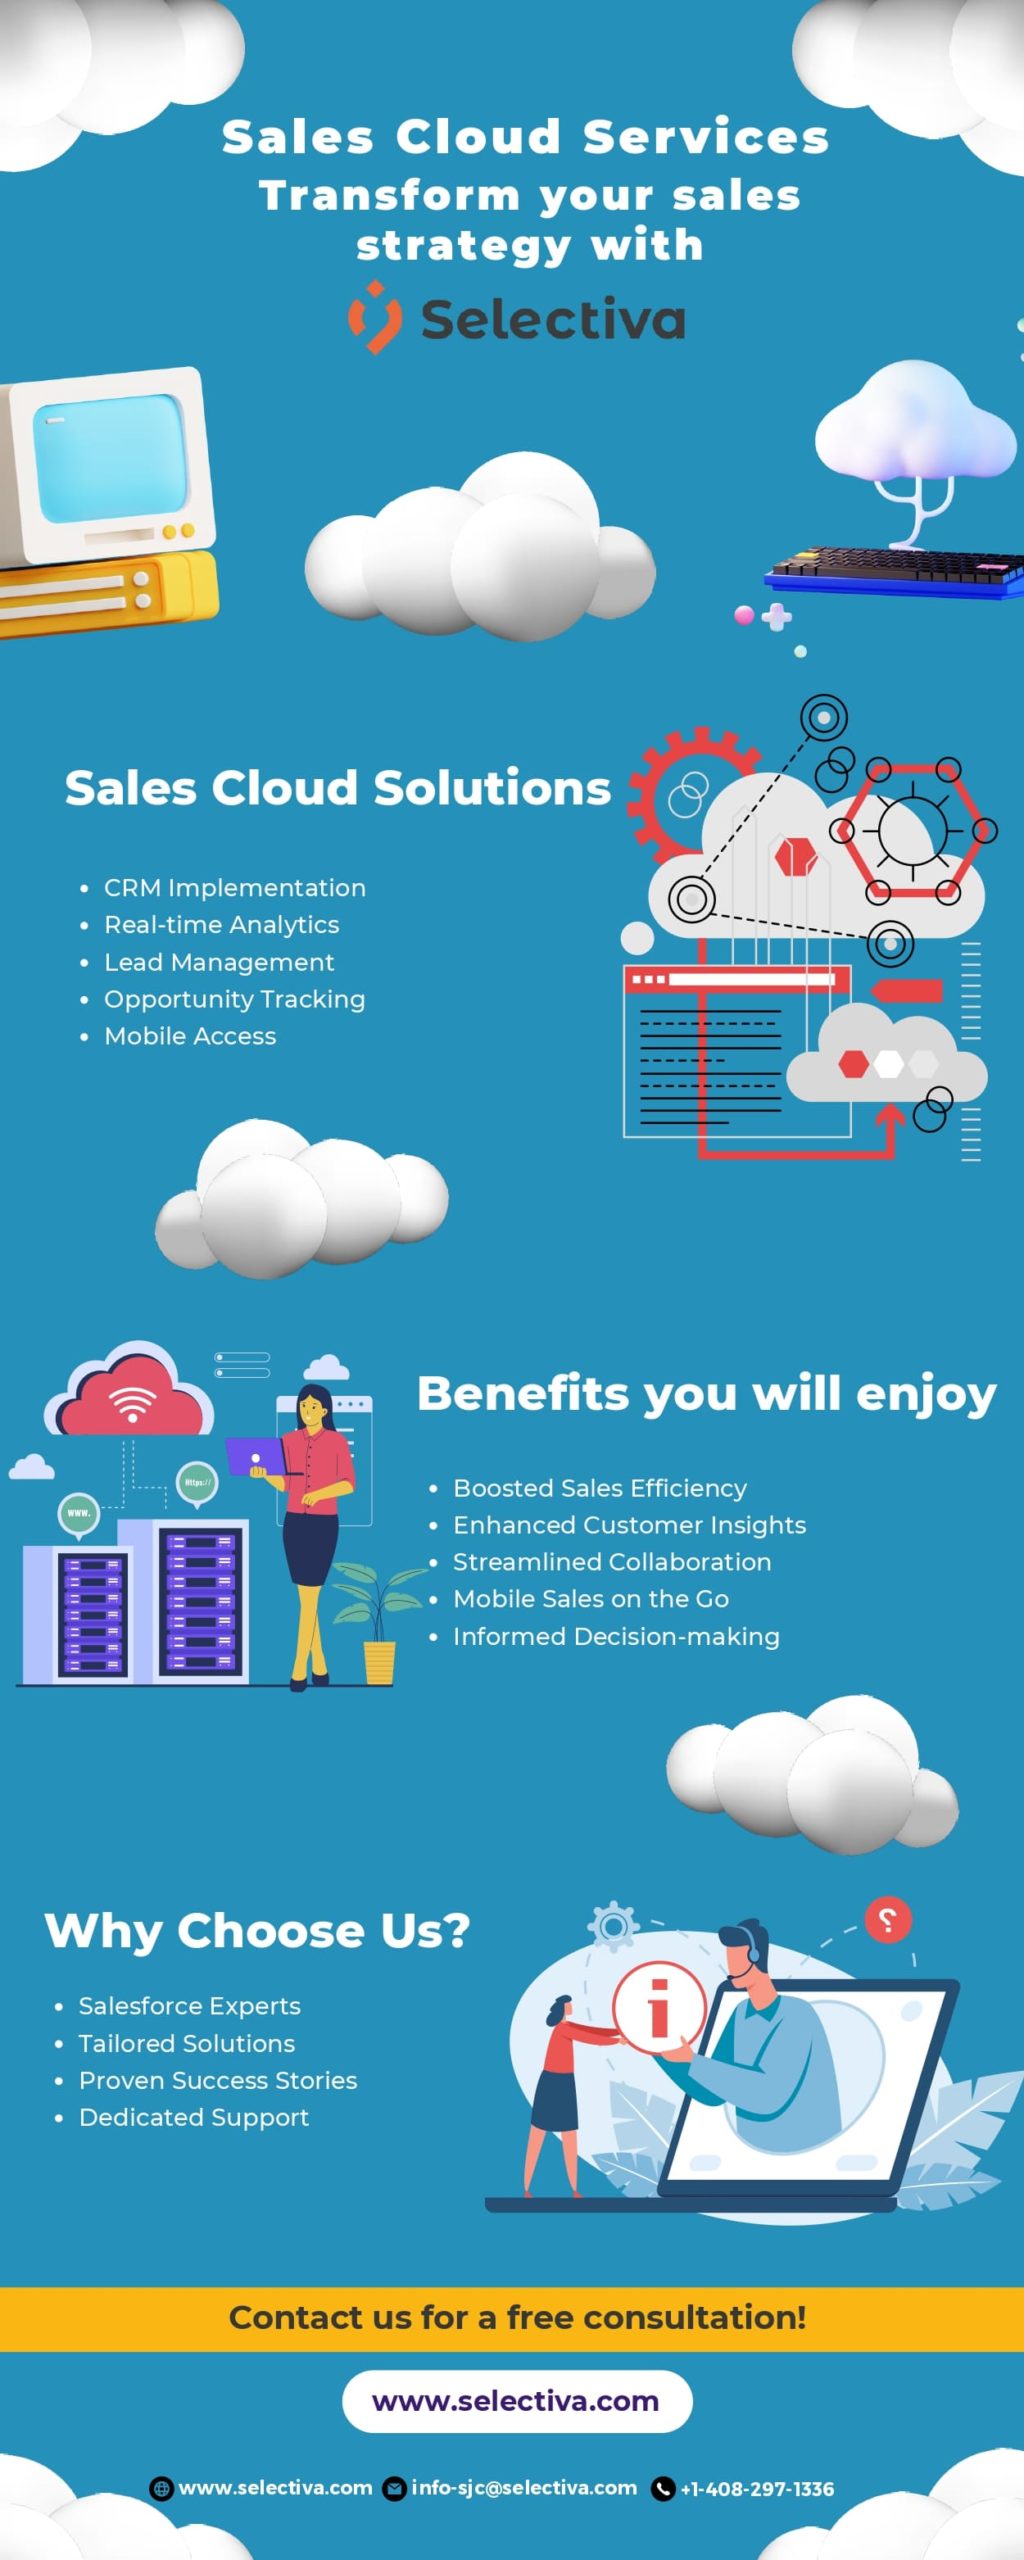 Transform your Sales Strategy with Salesforce Sales Cloud Services_Image.